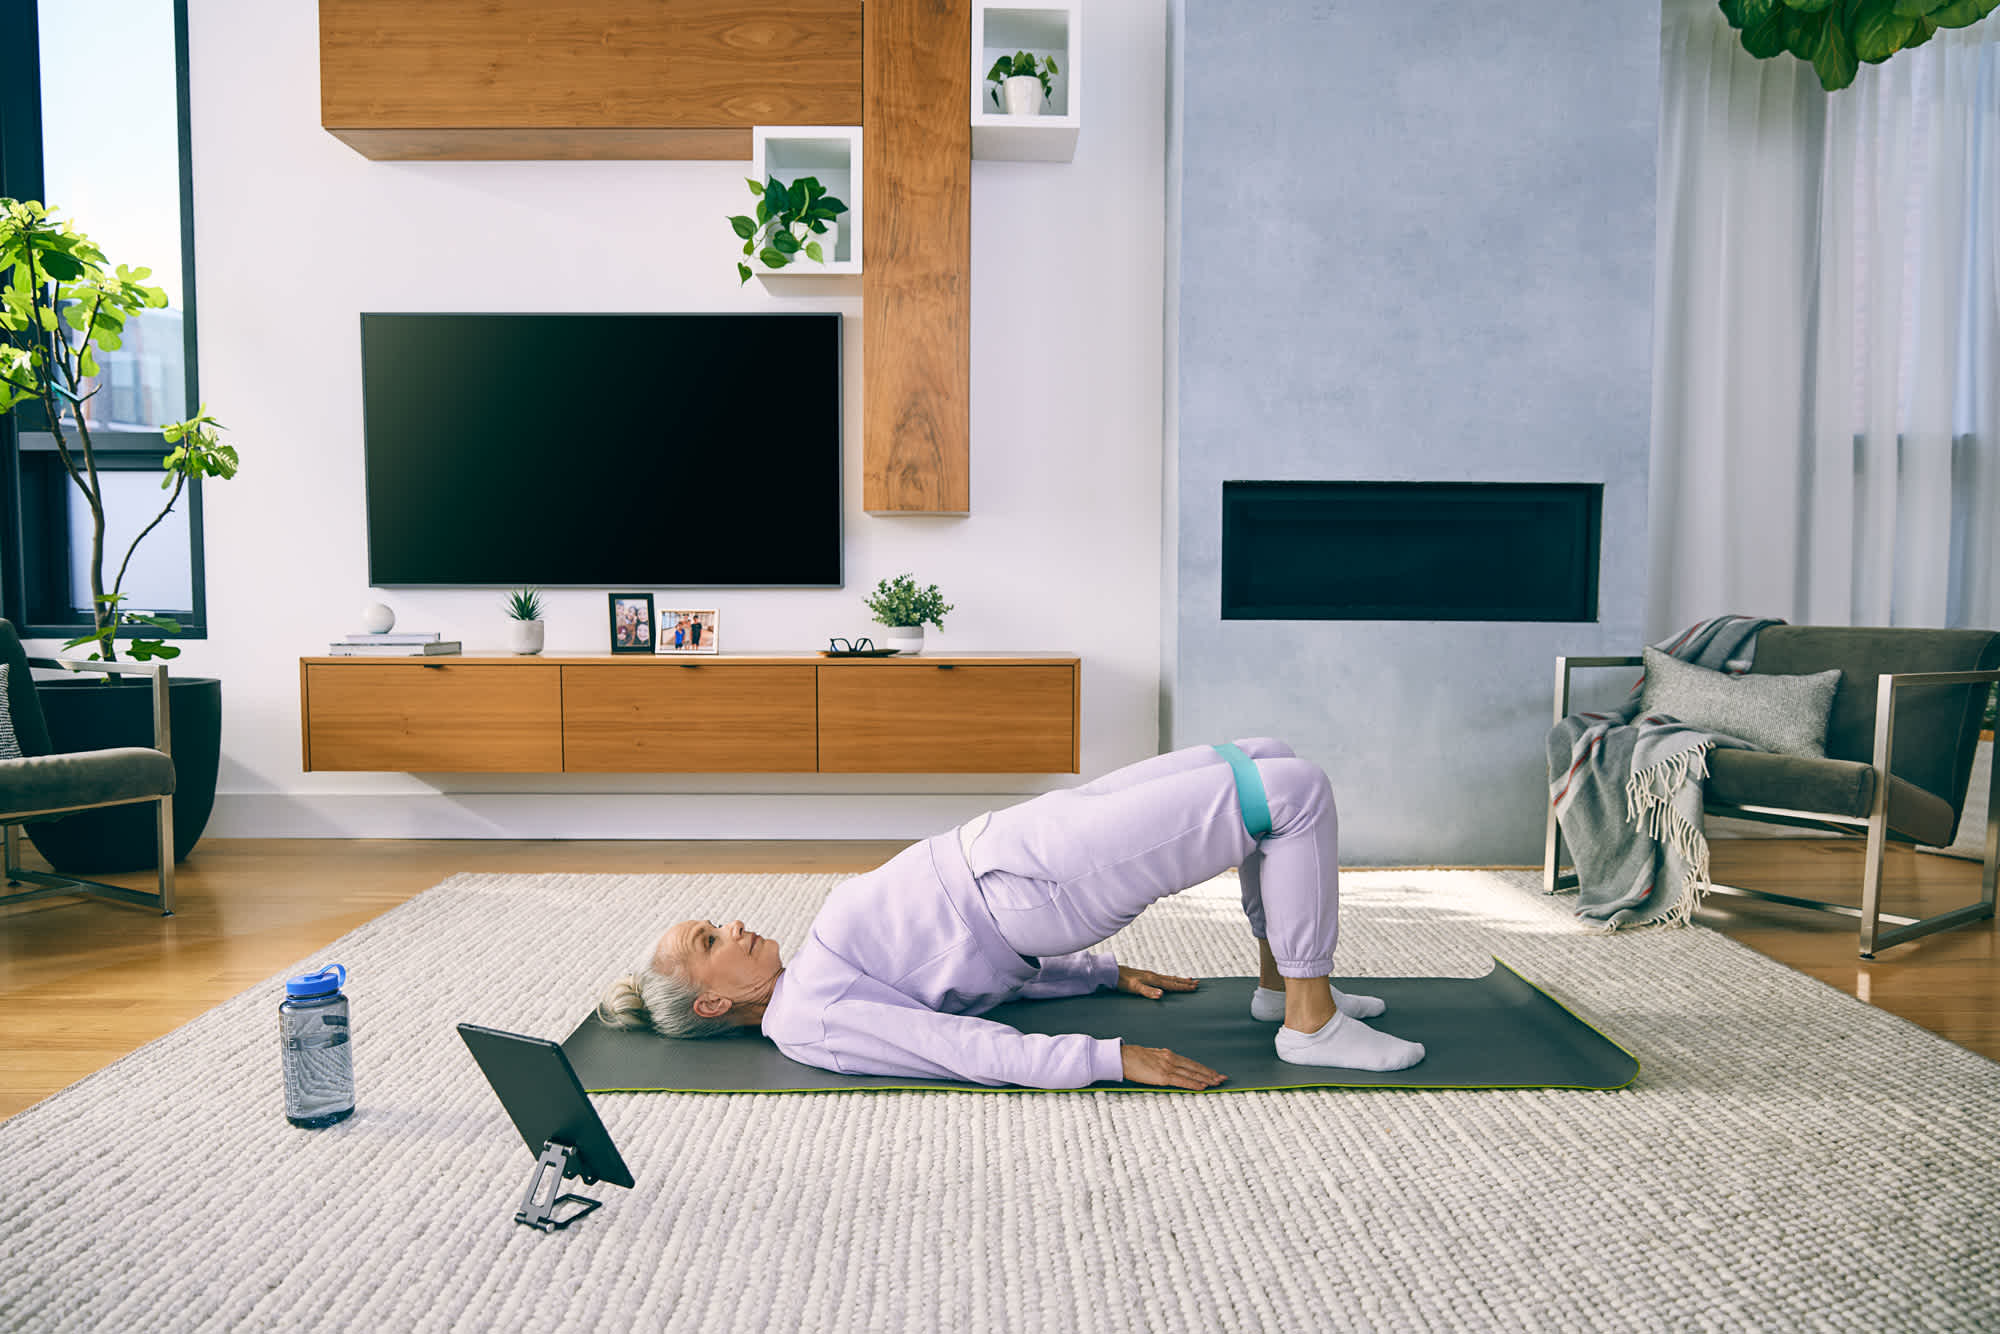 The safe way to do yoga for back pain - Harvard Health